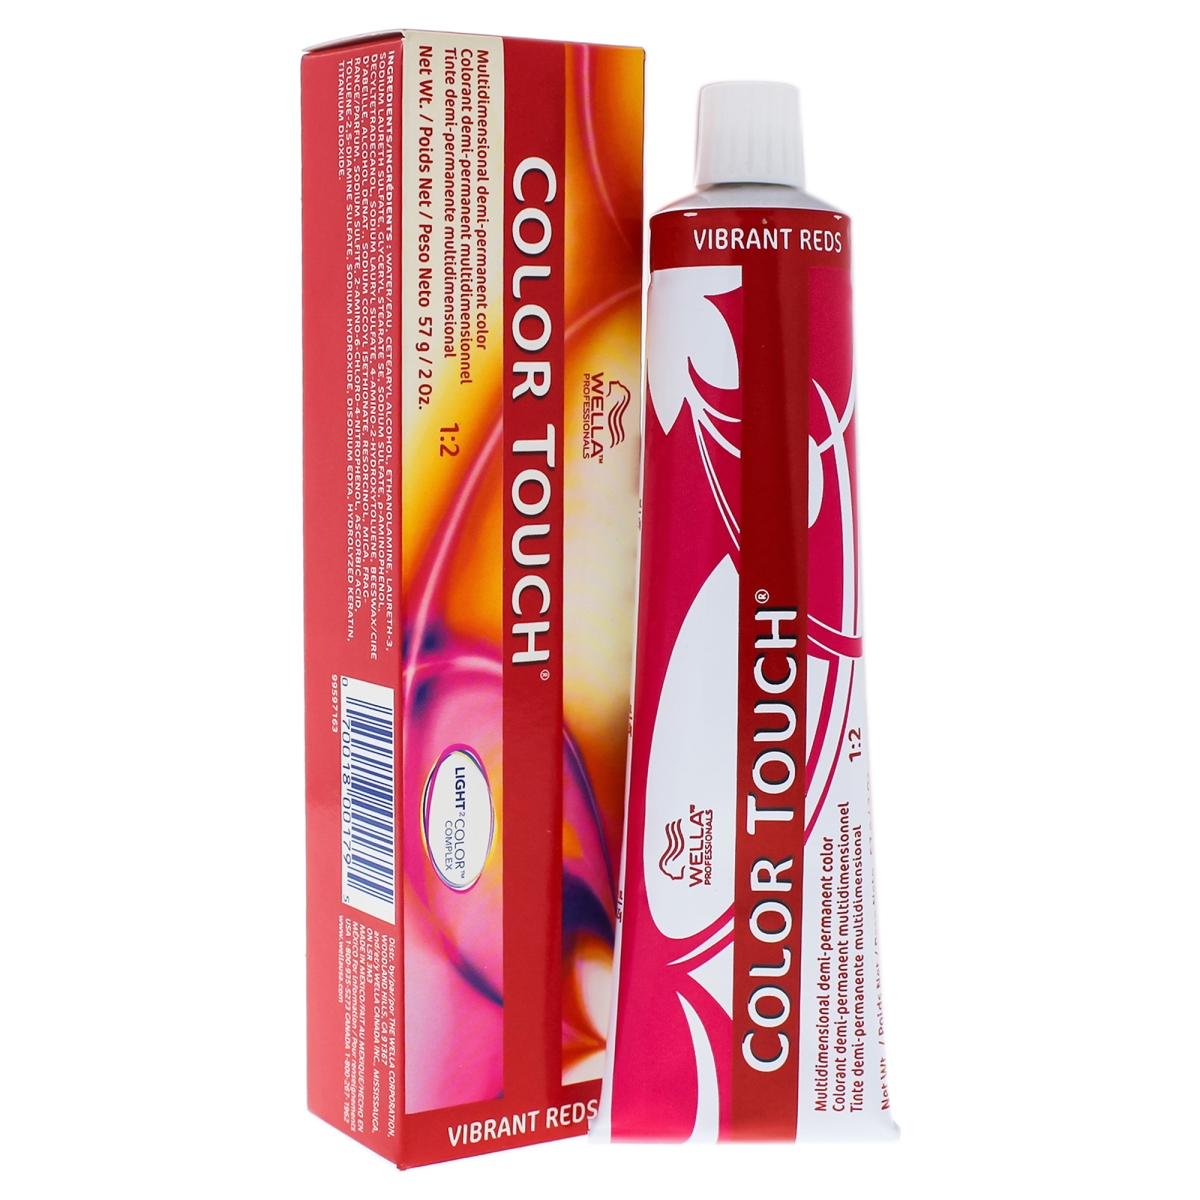 I0086966 Color Touch Demi & Permanent Hair Color For Unisex - 7 4 Medium Blonde & Red - 2 Oz